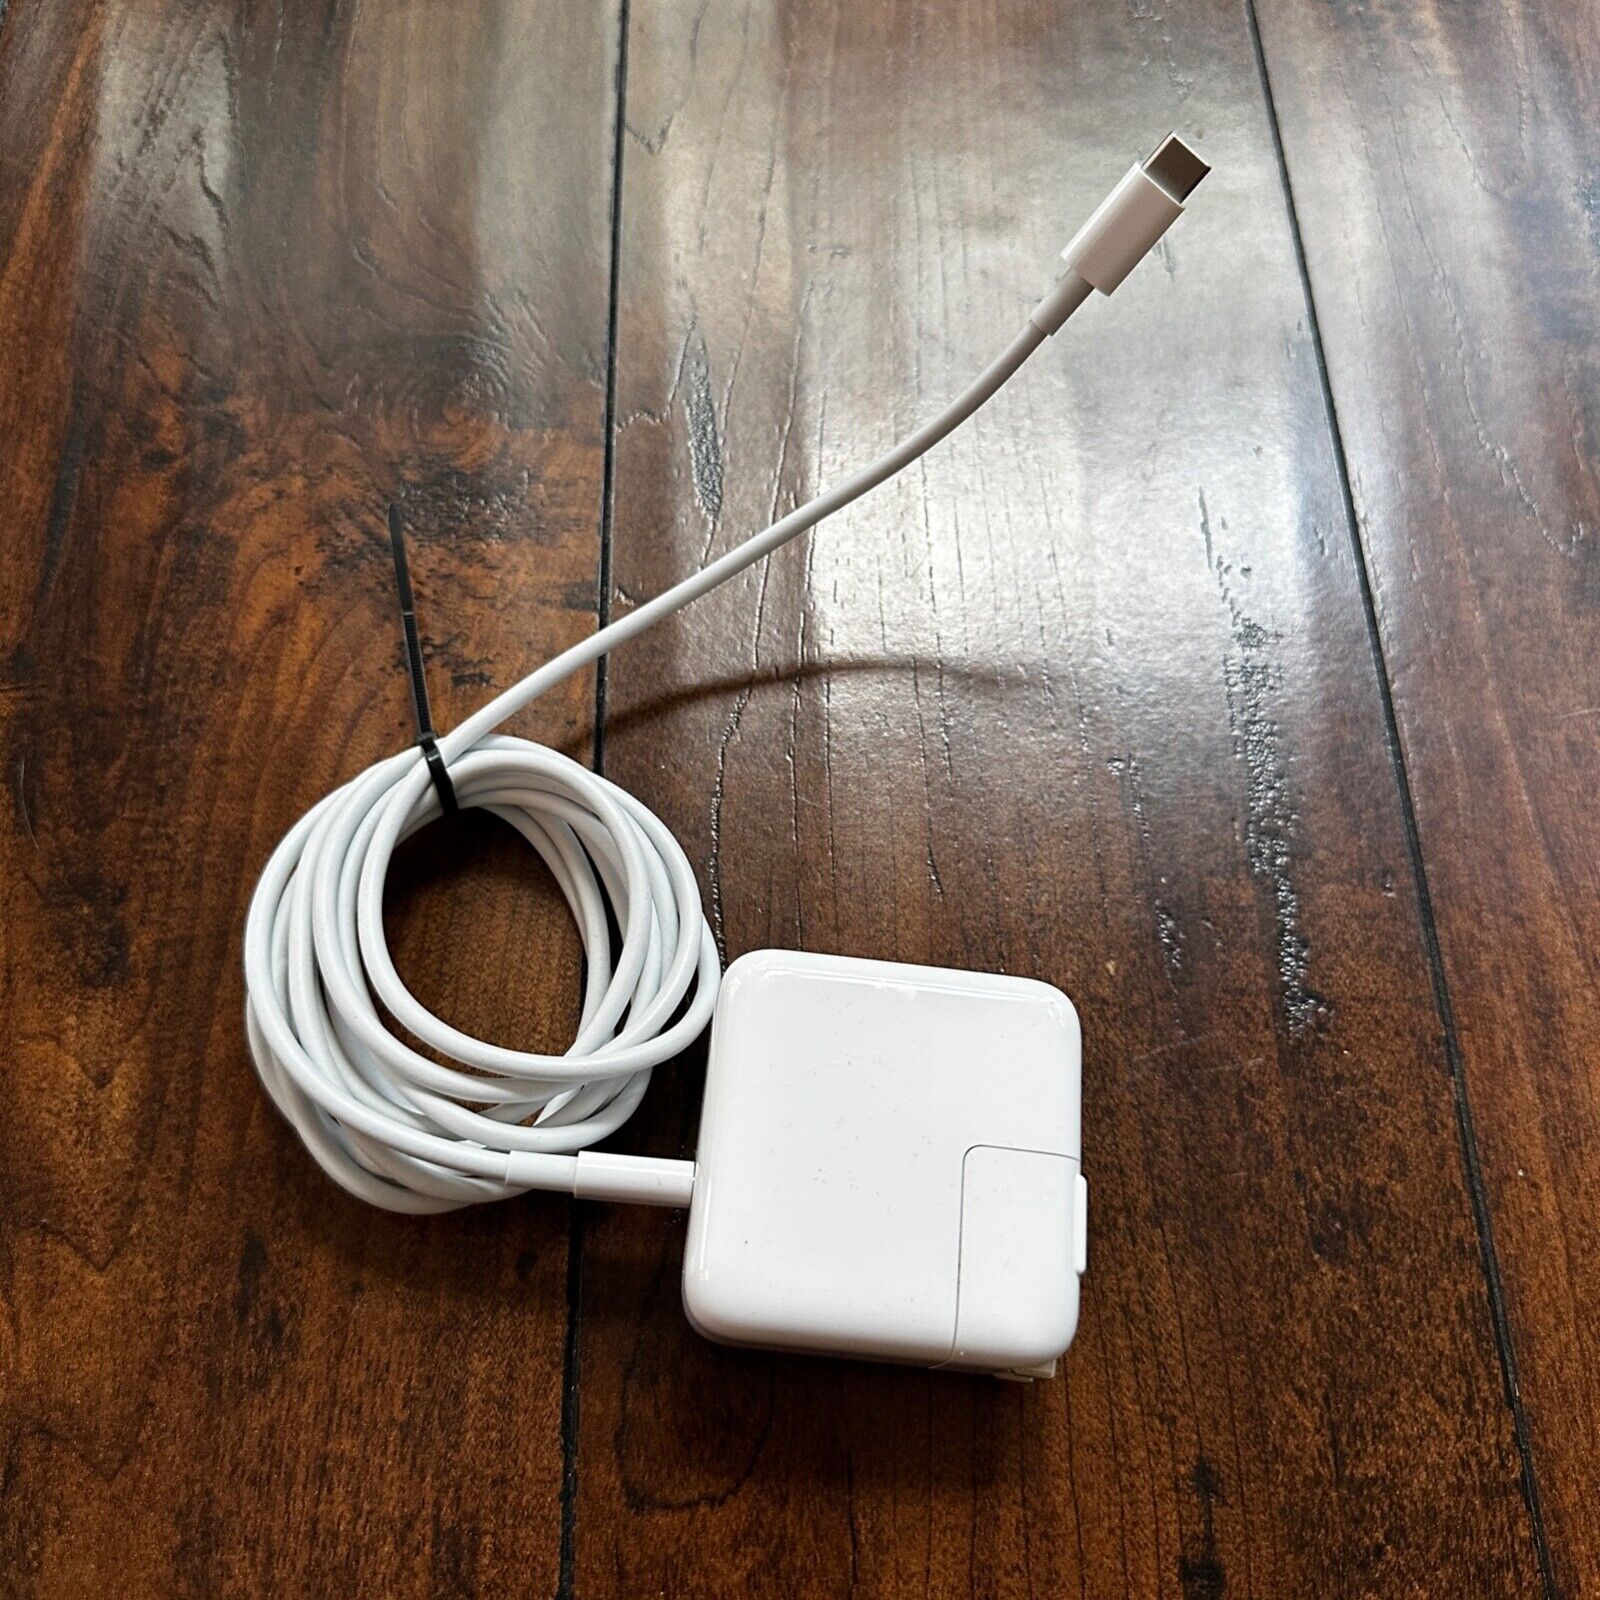 Authentic Apple 30W Usb-C Power Adapter Model#:A2164 6 foot UsbC to UsbC cord